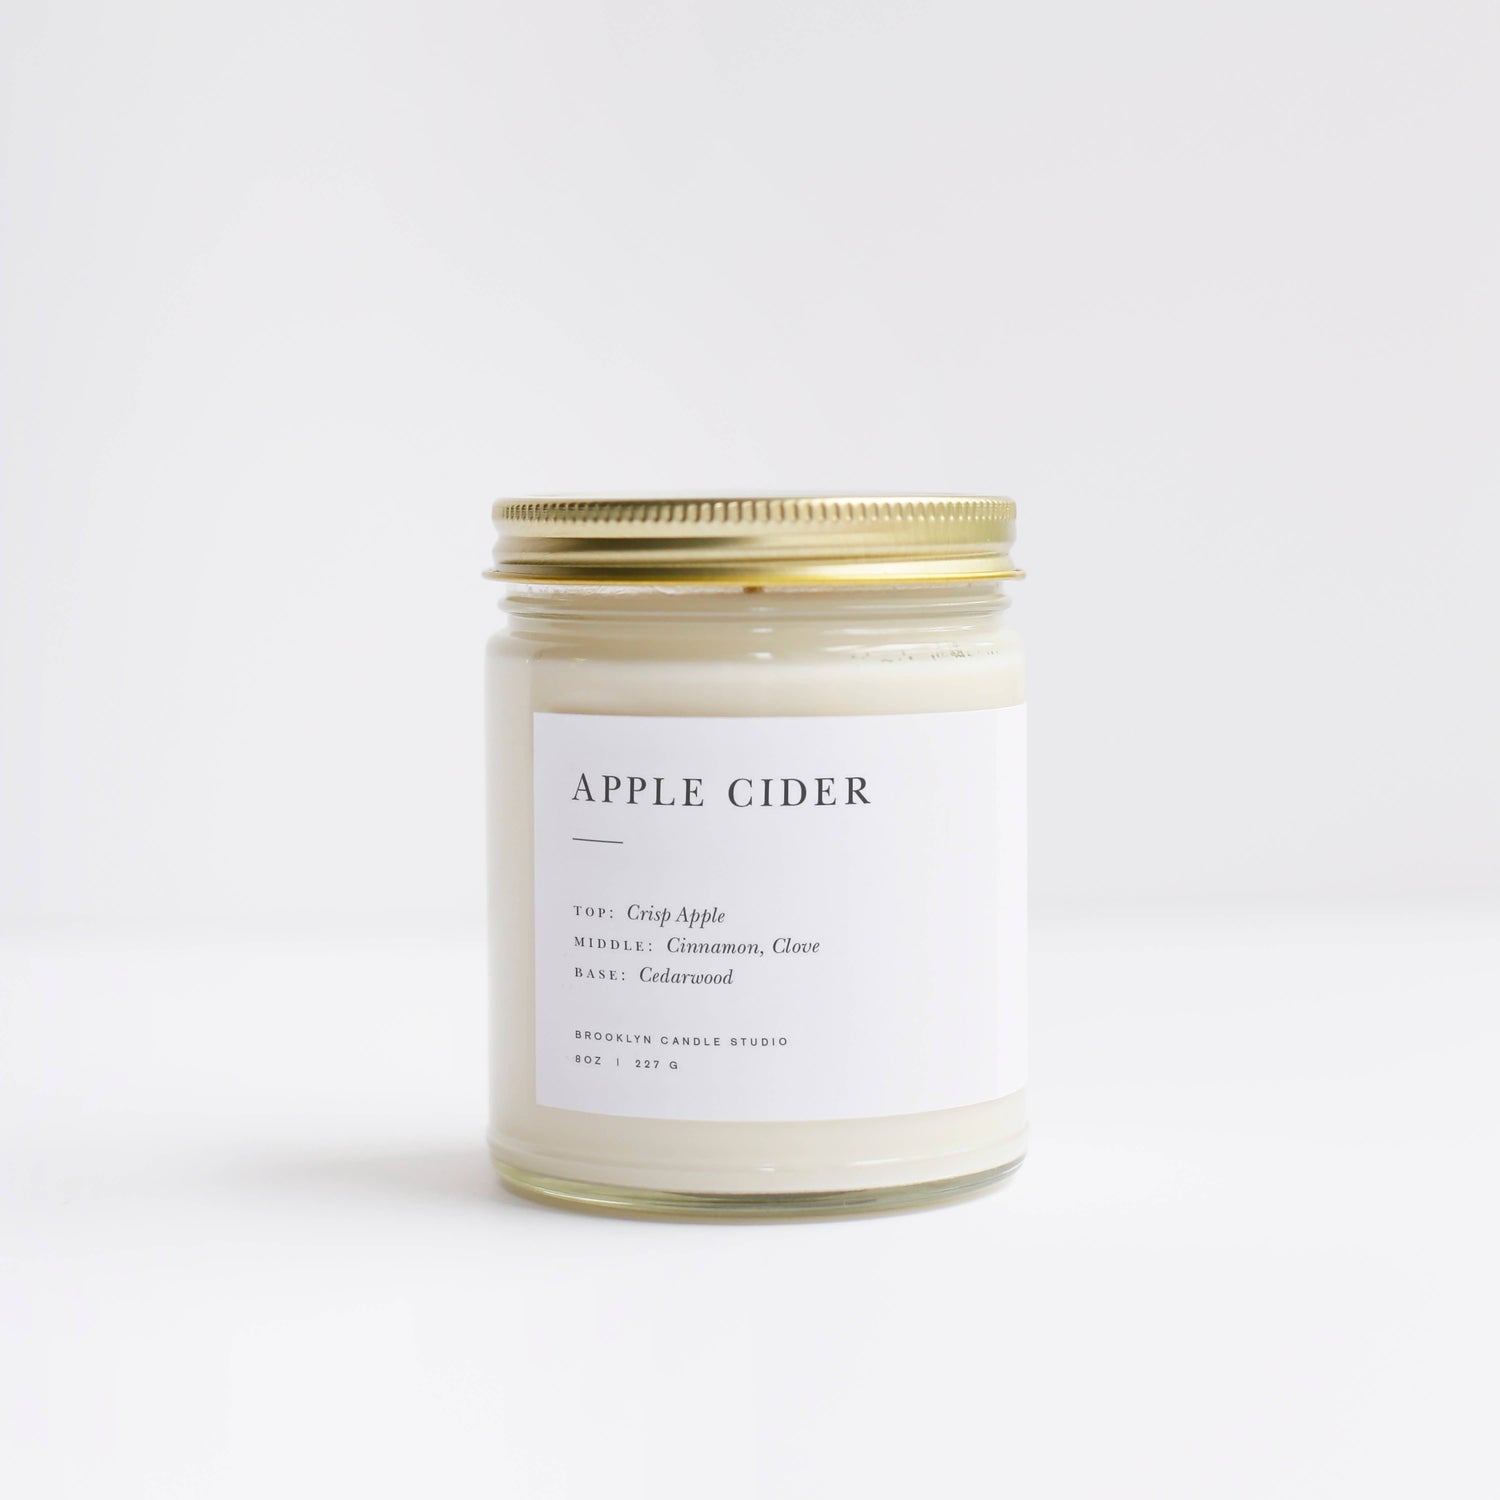 Apple Cider Minimalist candle in glass jar with metal lid by Brooklyn Candle Studio